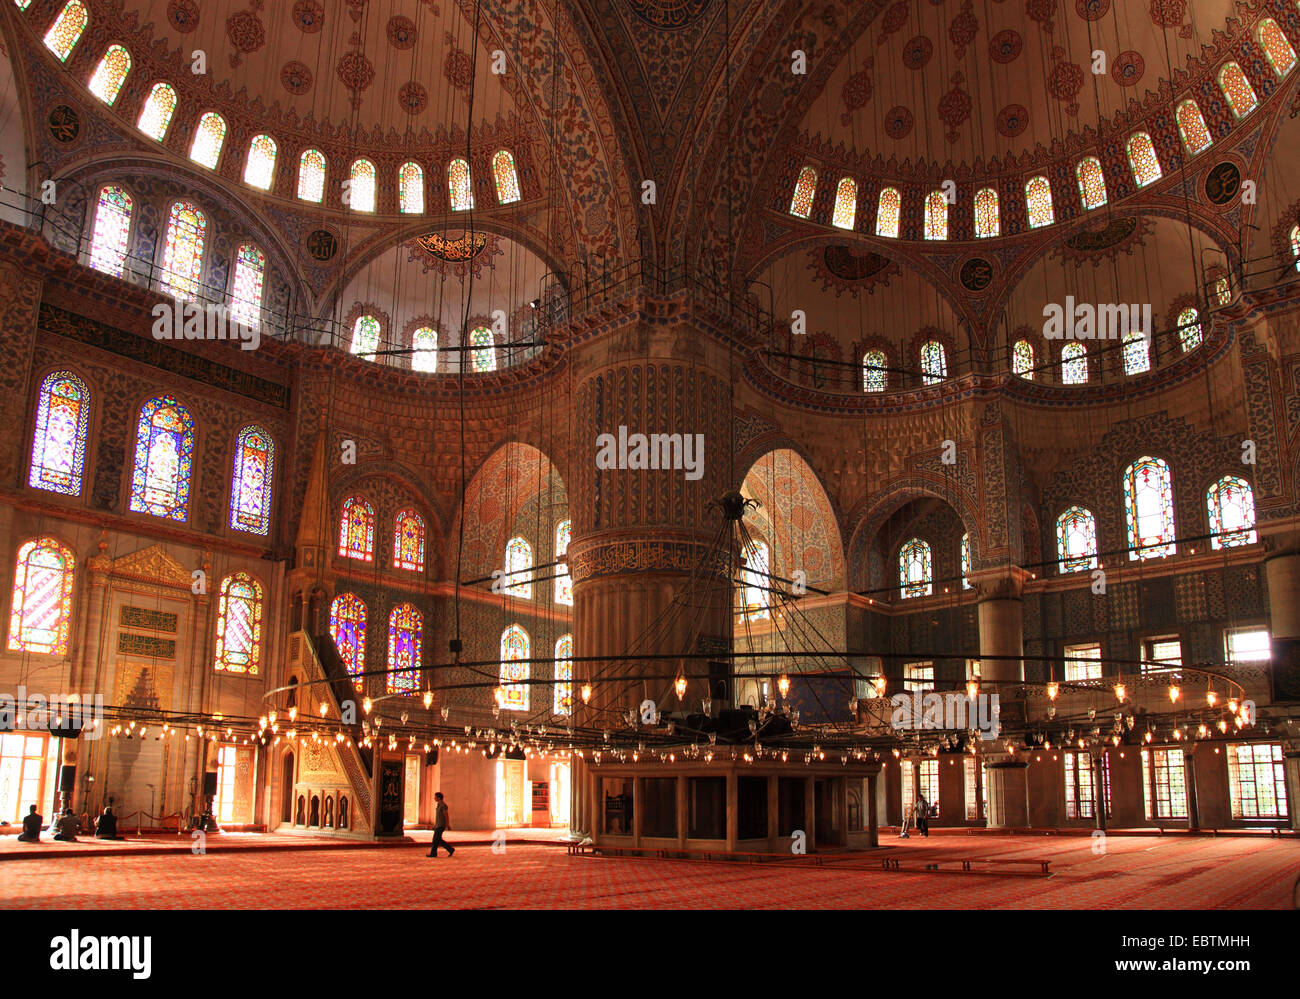 Mosquée Sultan Ahmed, Blue Mosque, Istanbul, Turquie, Innenraum Banque D'Images